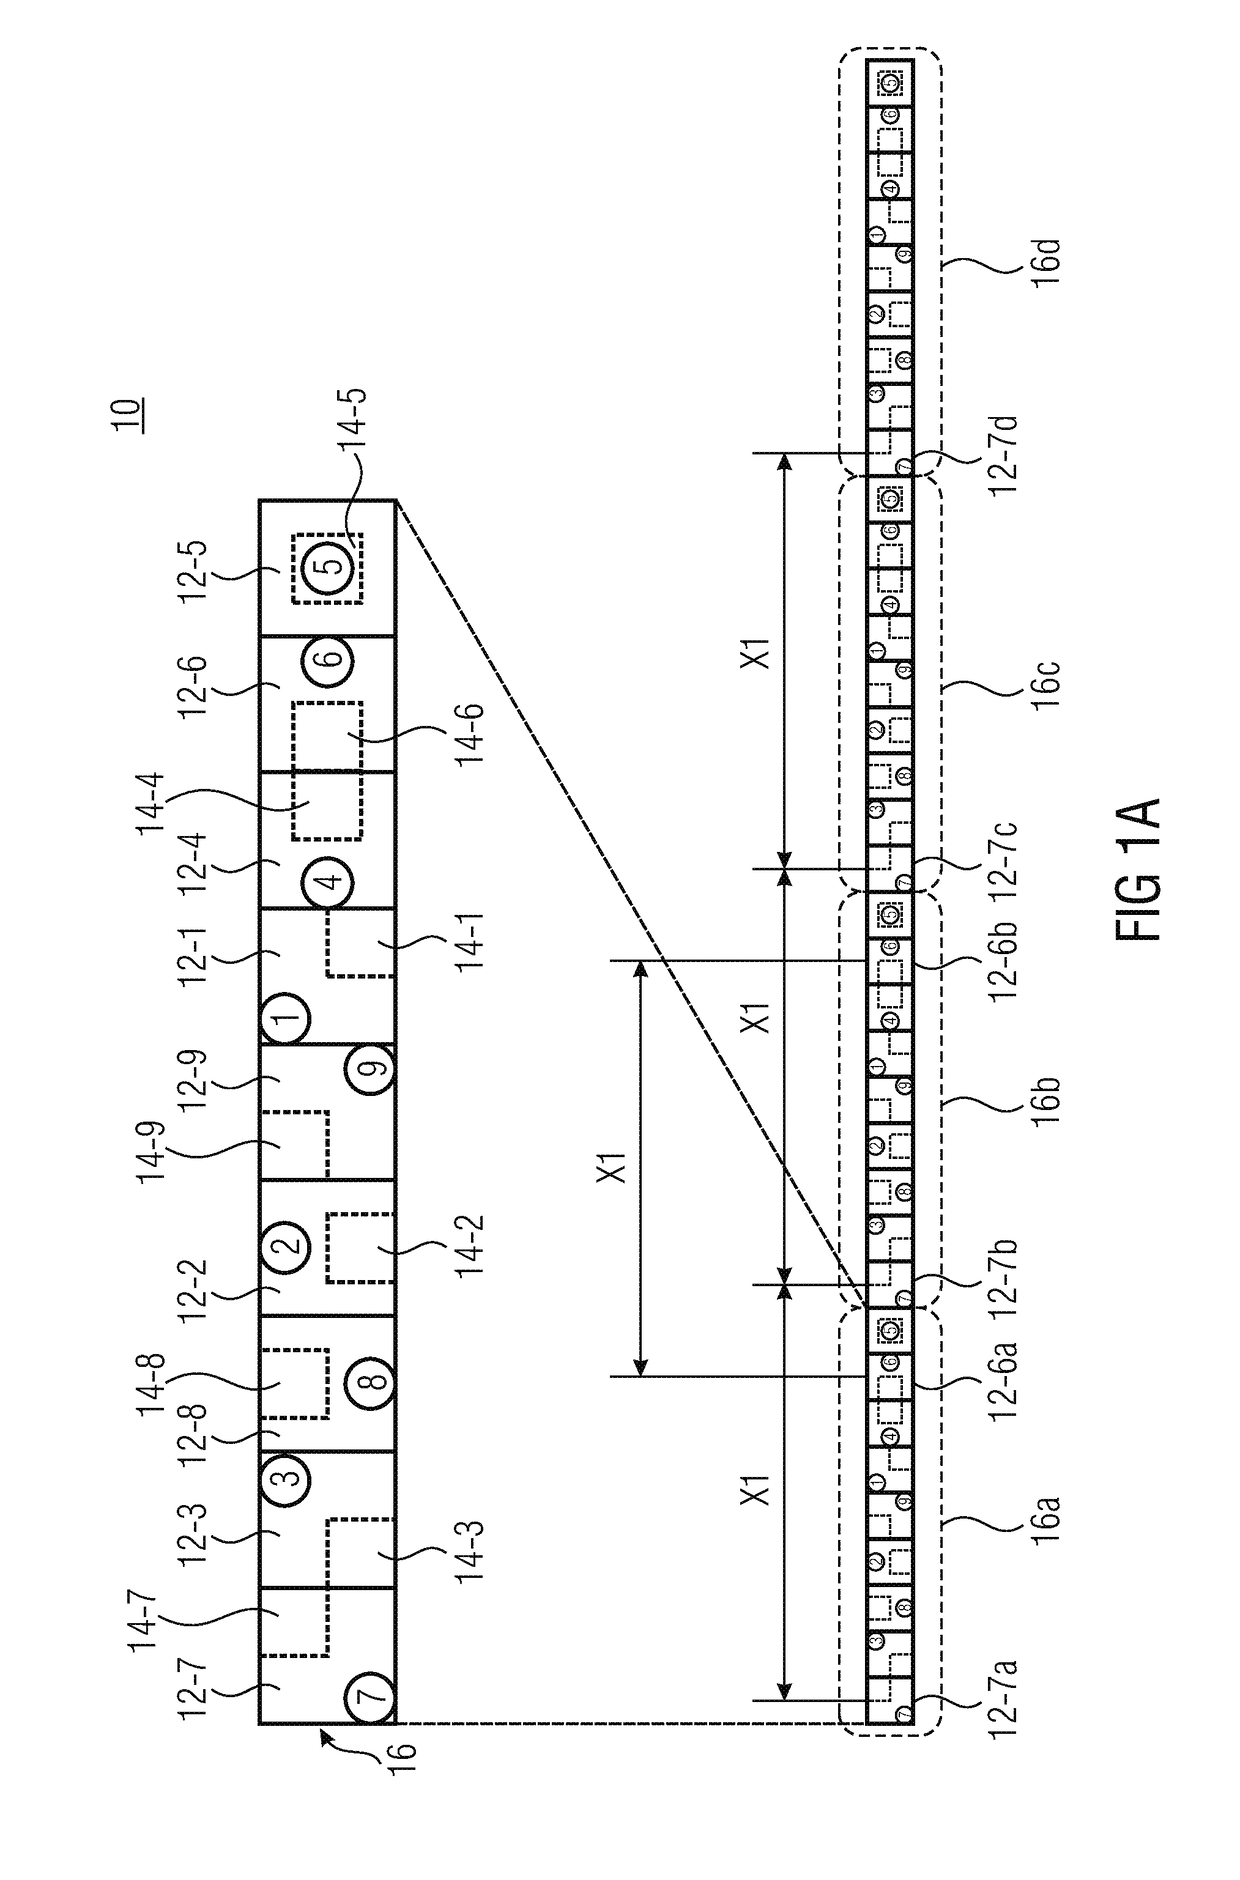 Multi-aperture device and method for detecting an object region